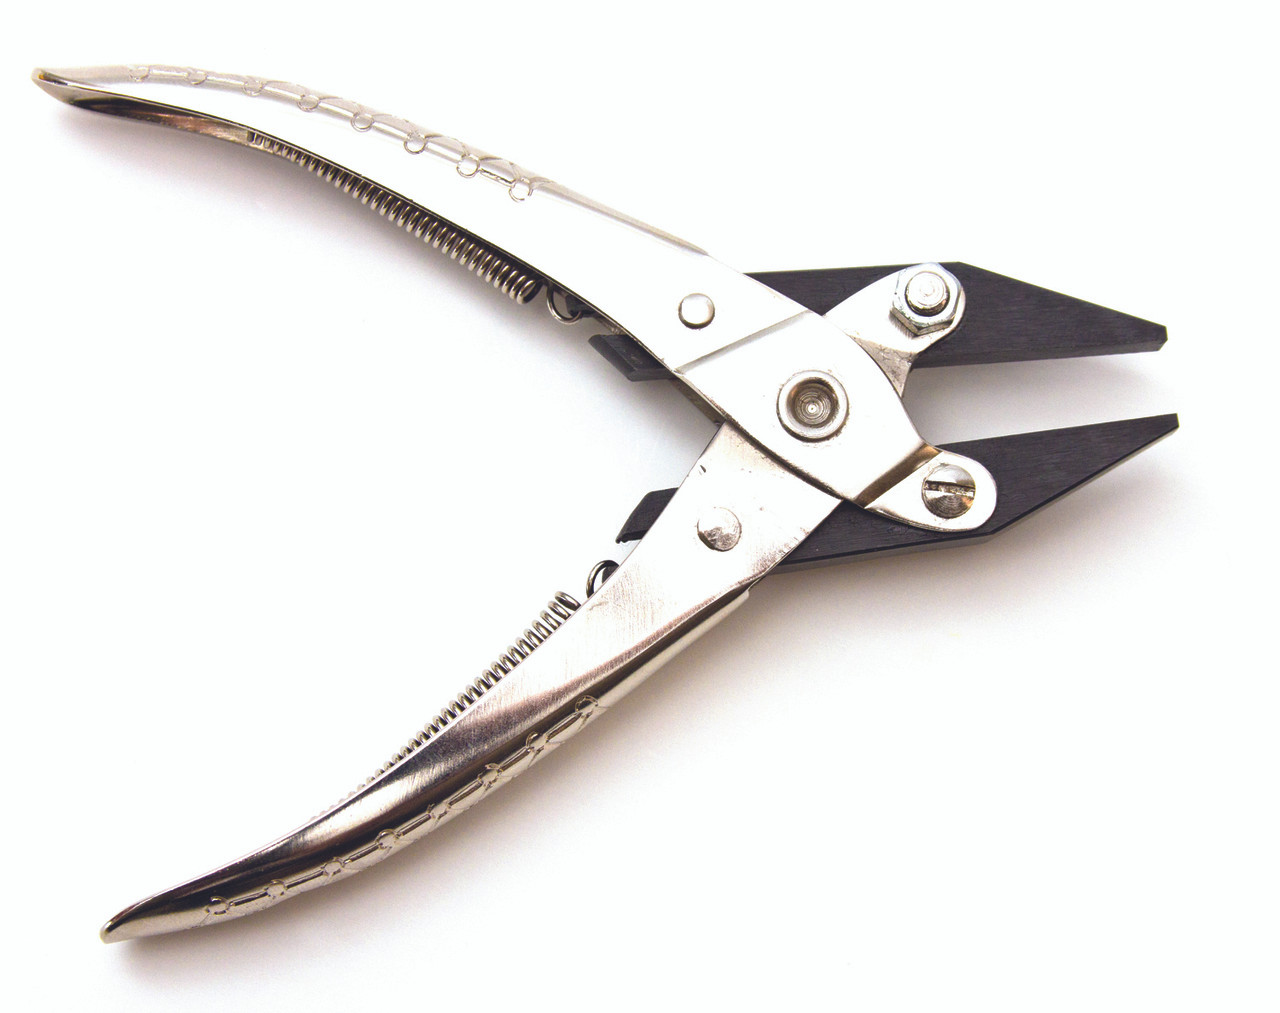 5 Inch Parallel Jaw Pliers